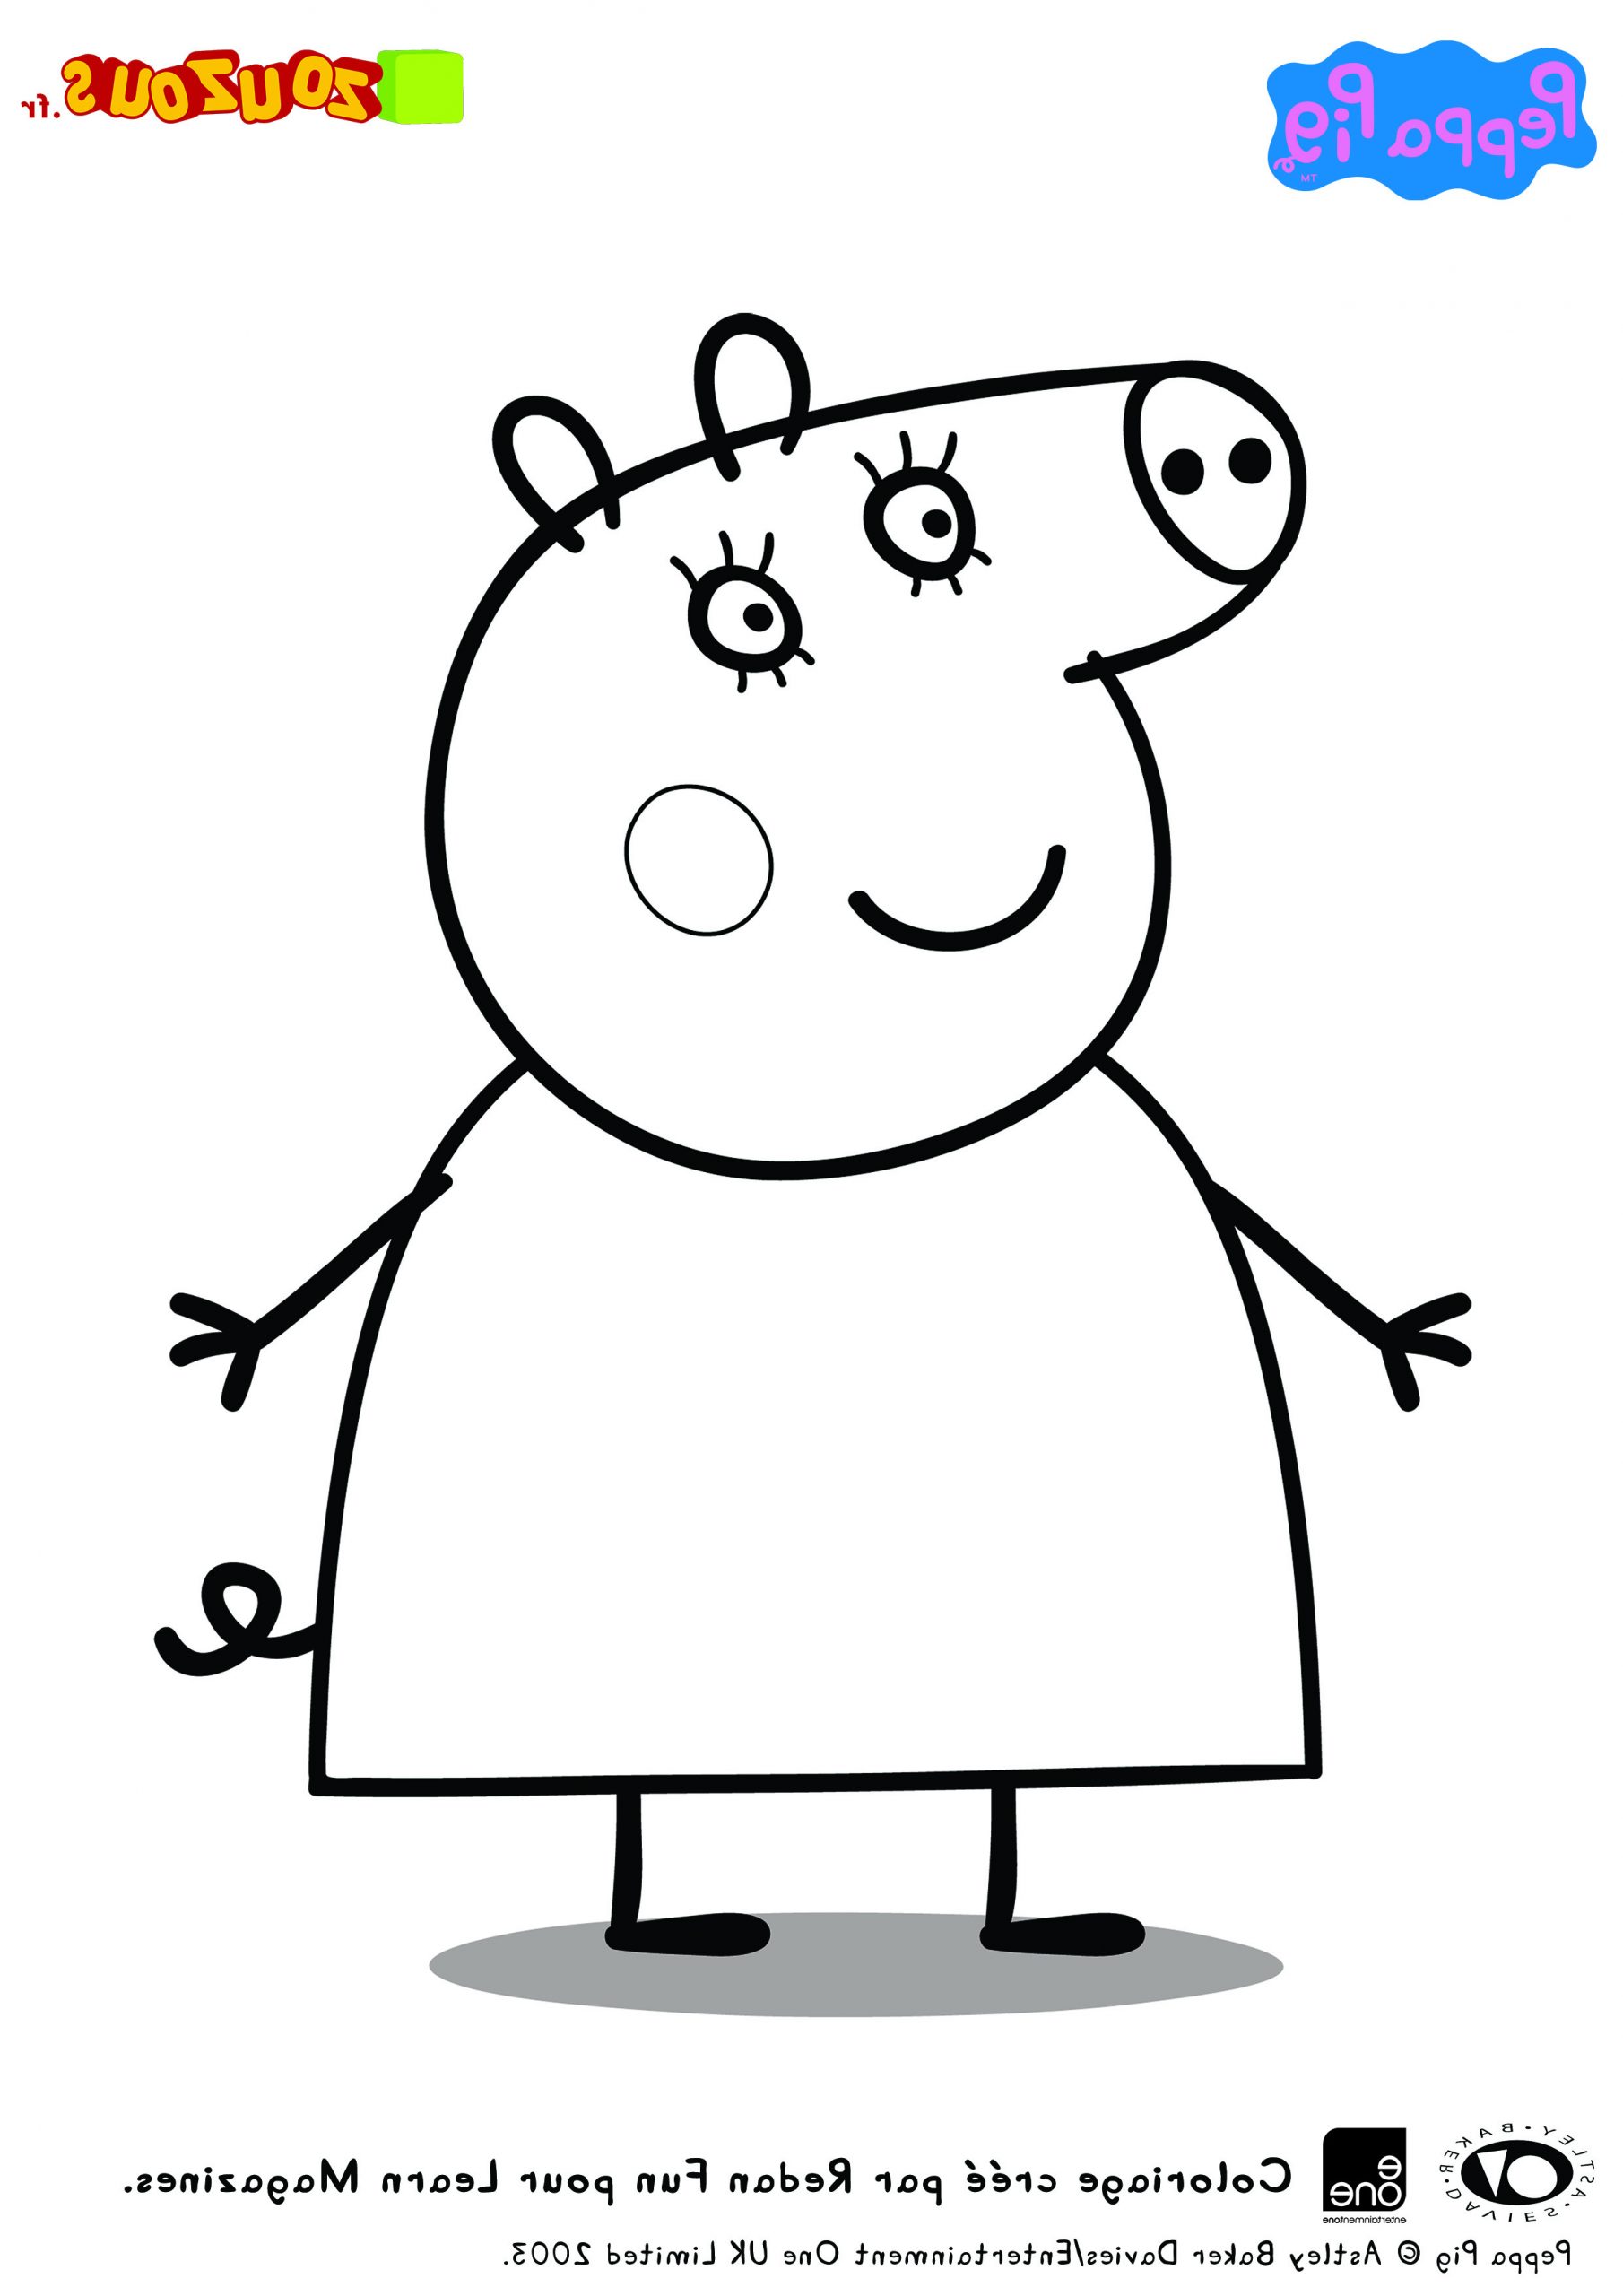 Coloriage Peppa Pig A Imprimer Inspirant Collection Belle Coloriage A Imprimer Mickey Et Ses Amis